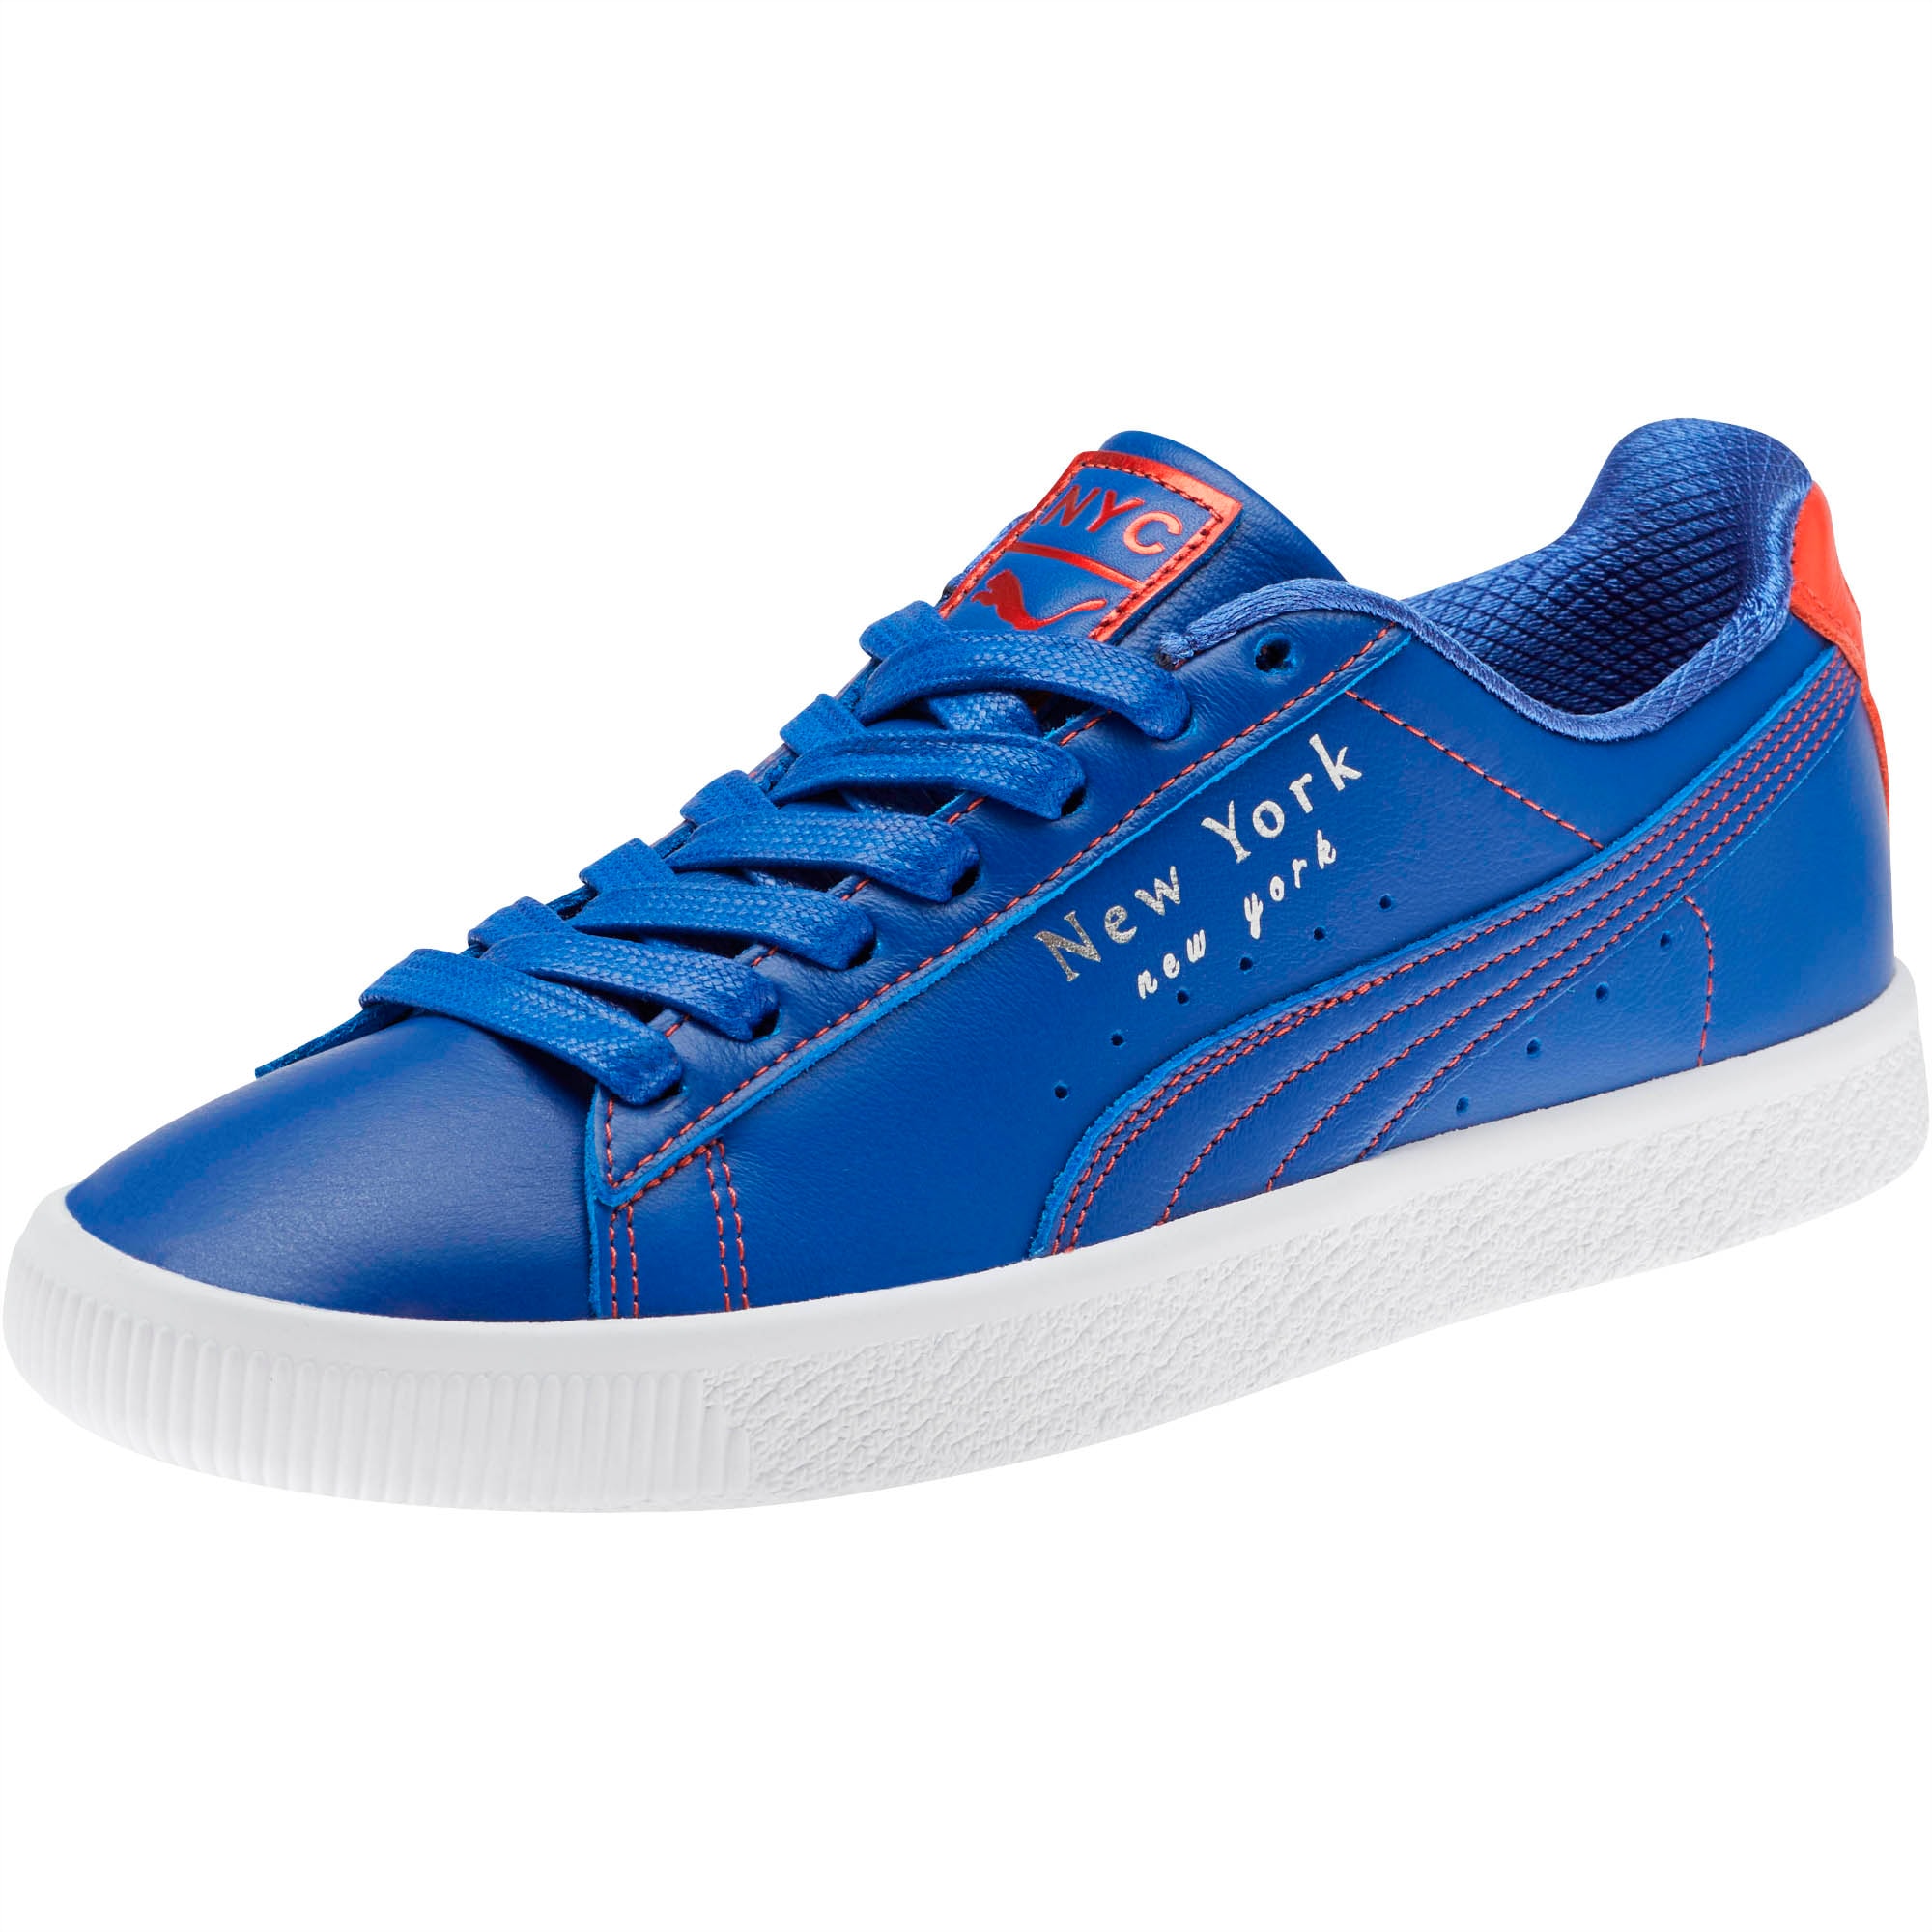 Clyde NYC Knicks Sneakers | PUMA US